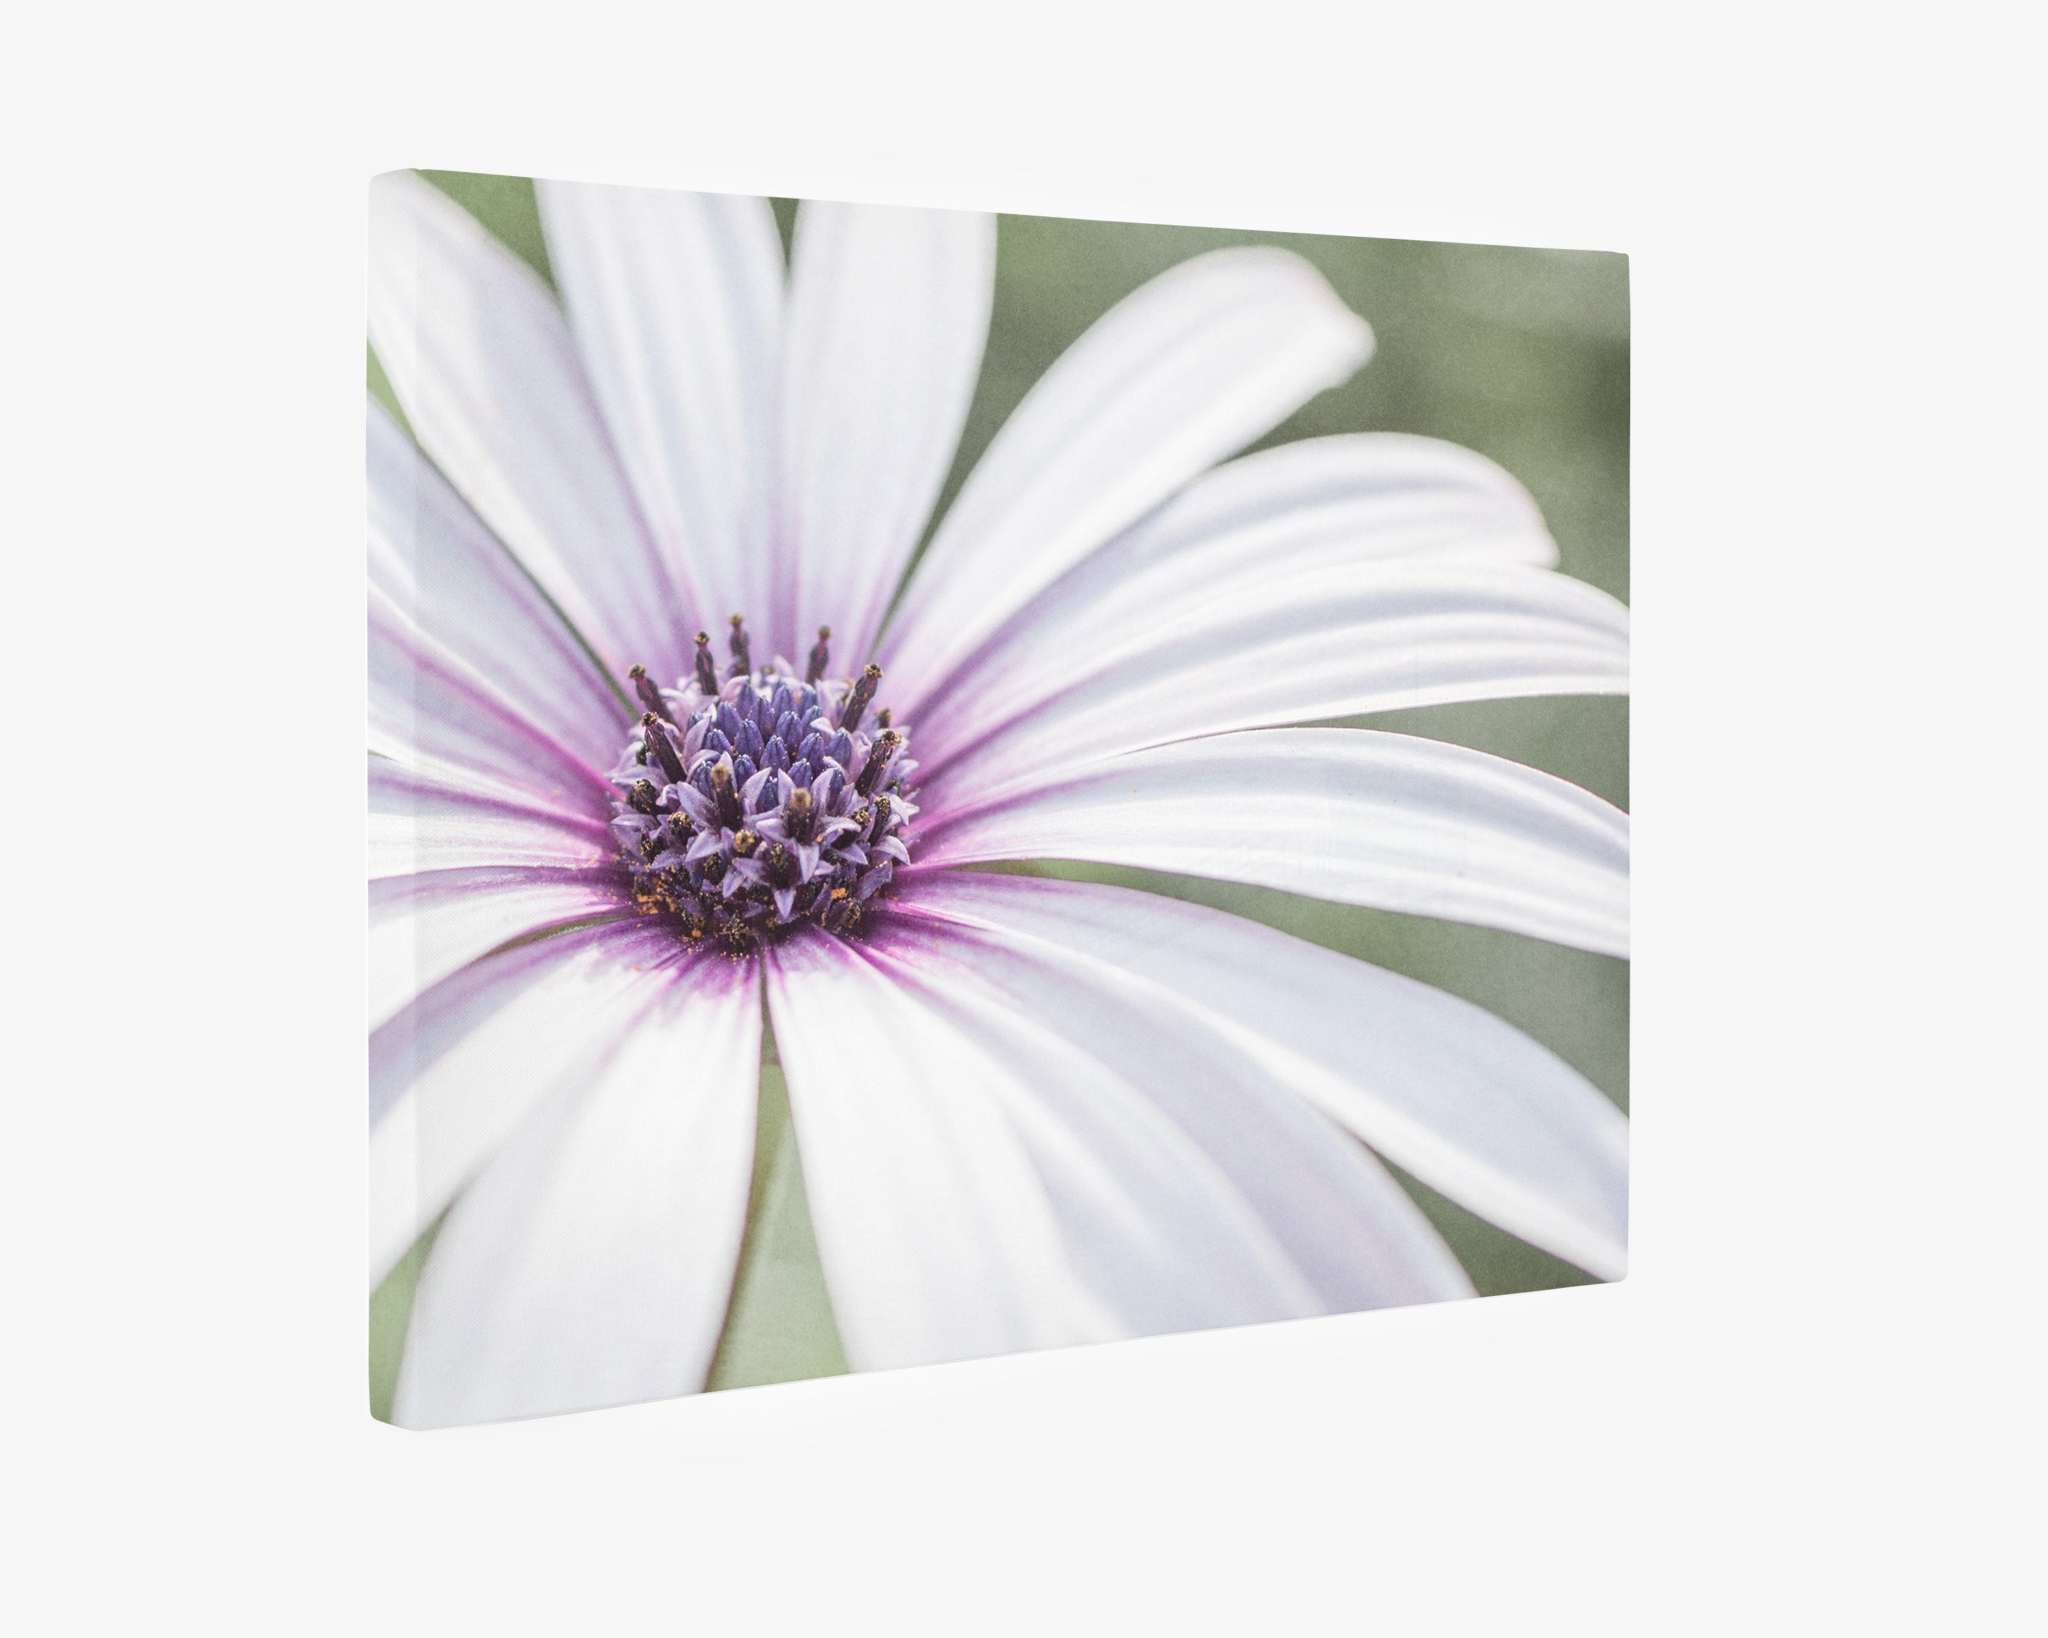 A close-up view of a white and purple daisy flower printed on an artist-grade poly-cotton blend canvas. The flower's intricate details, including its purple center and delicate petals, are prominently featured against a soft, blurred background. This ready-to-hang solution boasts a clean, minimalistic design. 'Bed of Petals' by Offley Green provides a stunning representation of nature with the Large White Daisy Flower Picture in their Floral Wall Art collection.